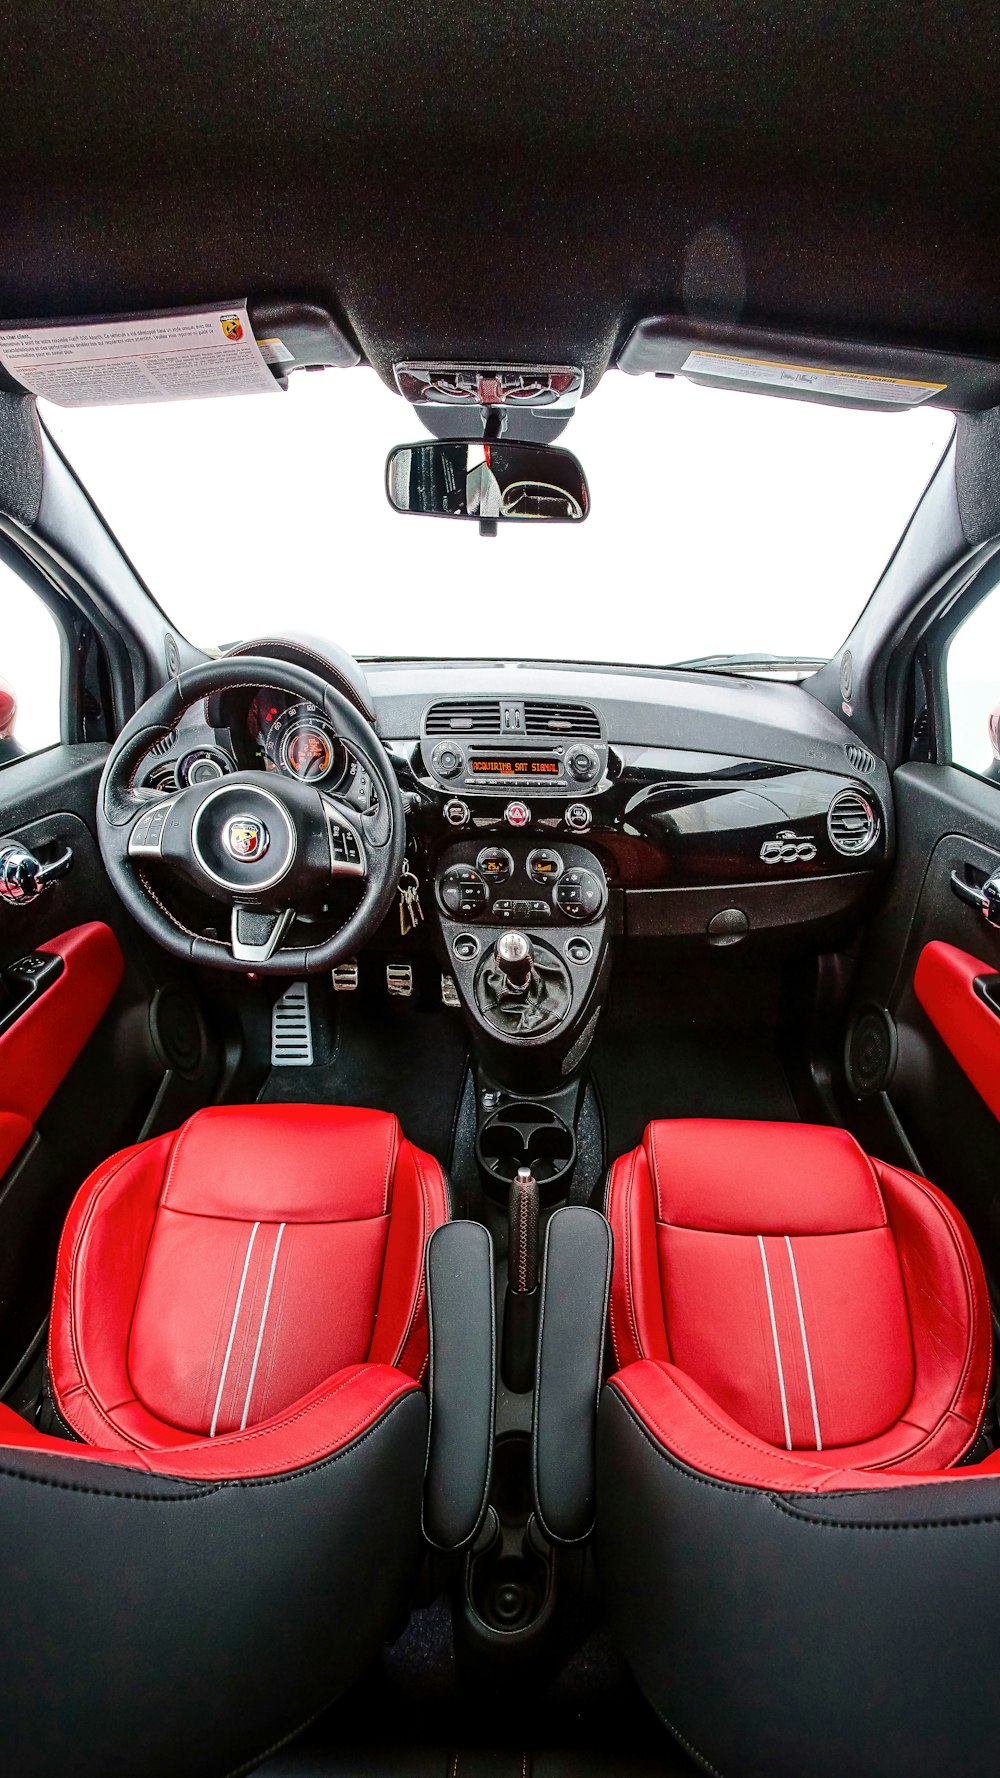 the interior of a car with red and black seats